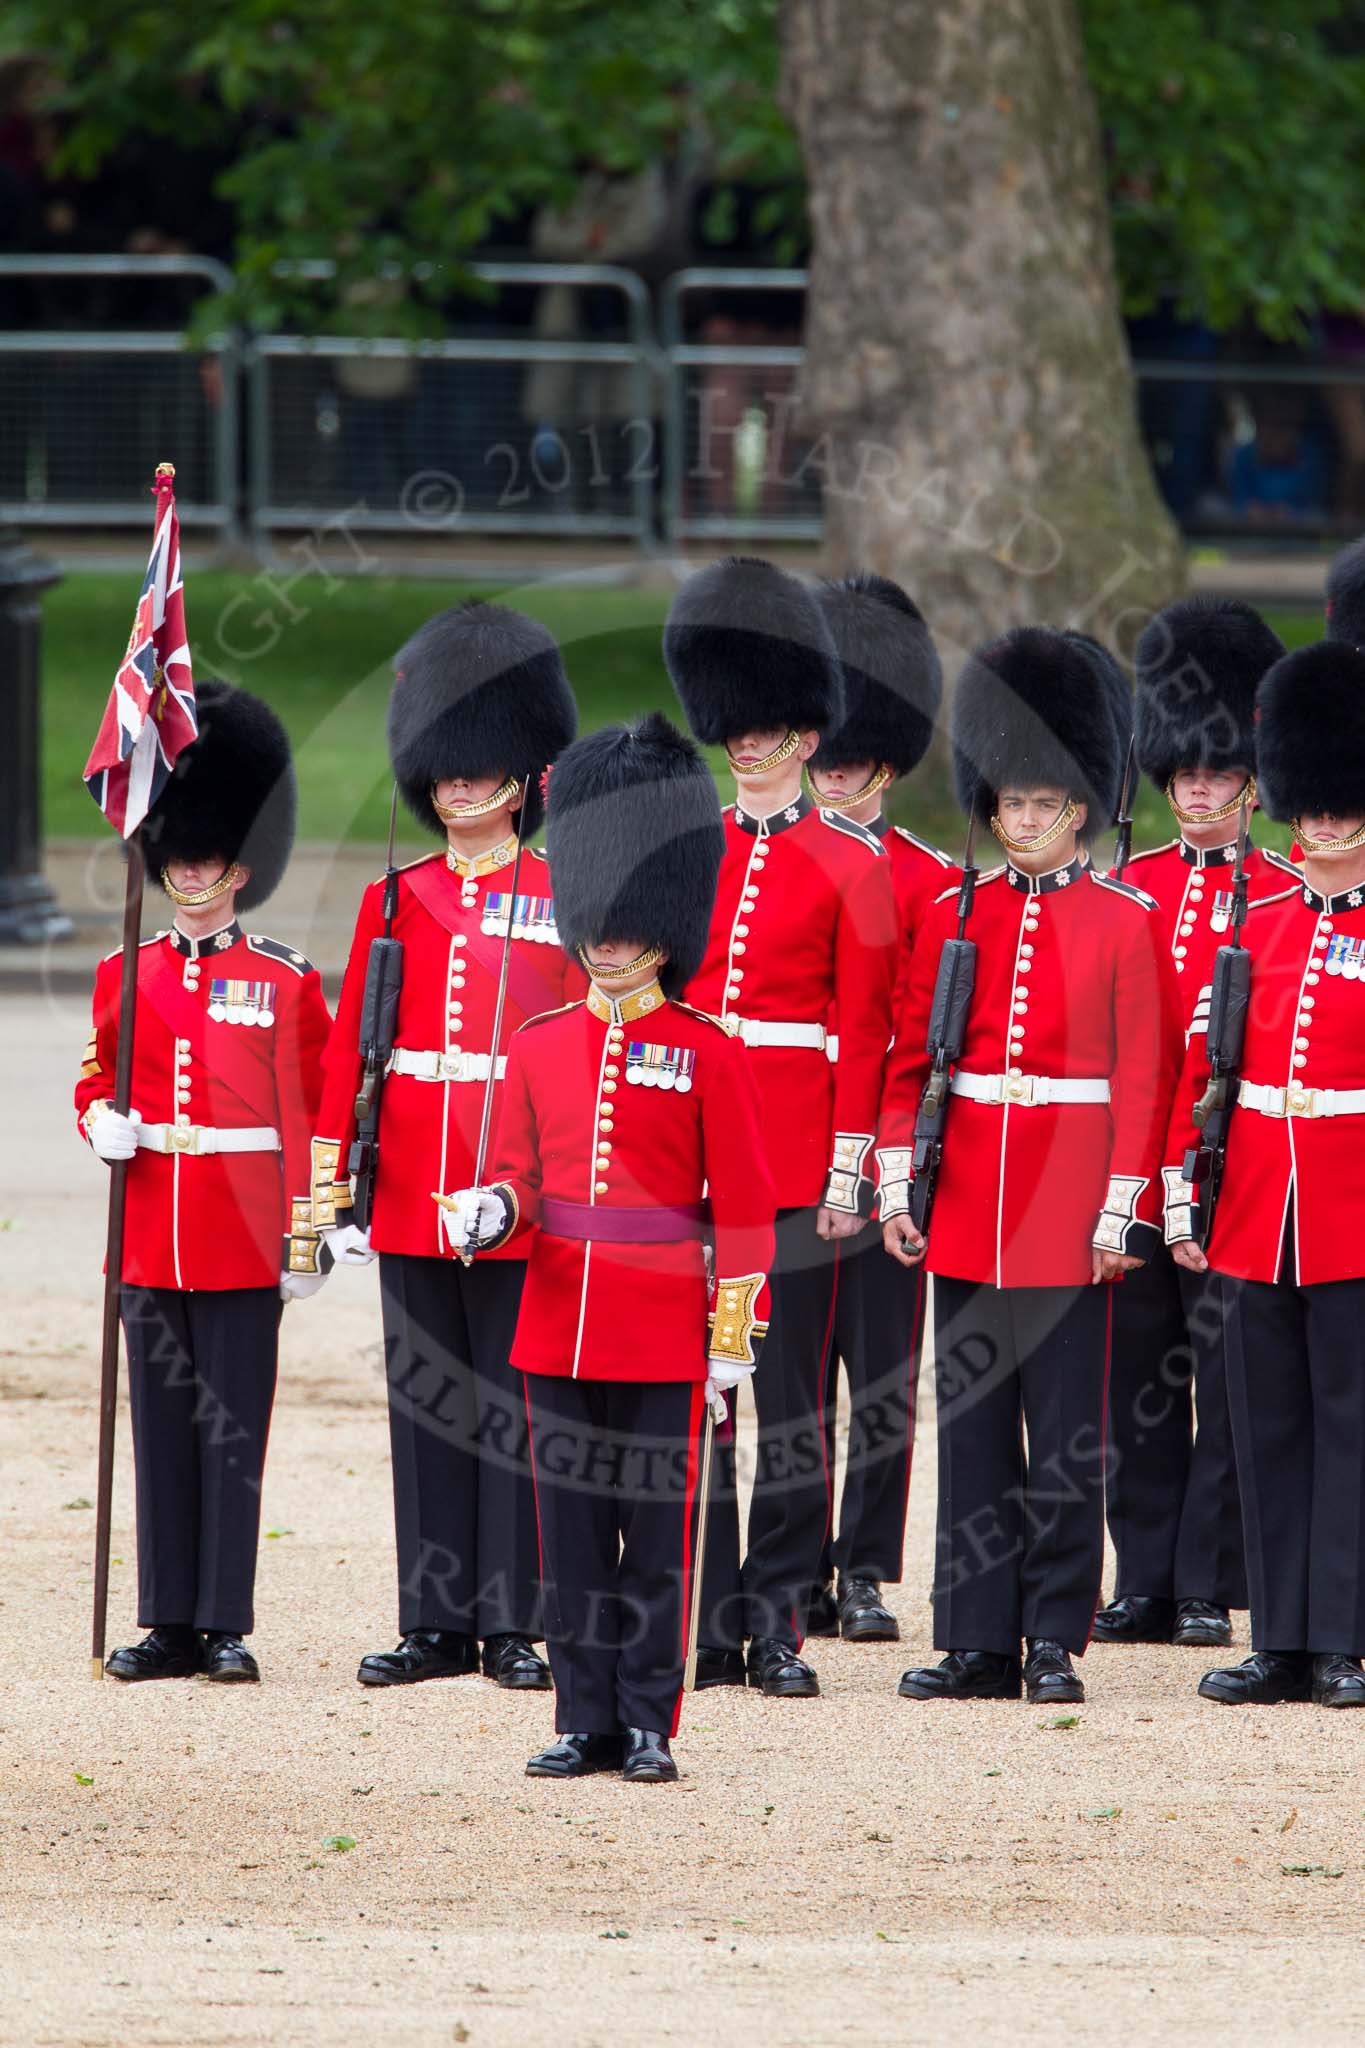 The Colonel's Review 2012: No. 1 Guard (Escort for the Colour) 1st Battalion Coldstream Guards, in front Captain R M Crook..
Horse Guards Parade, Westminster,
London SW1,

United Kingdom,
on 09 June 2012 at 11:09, image #224